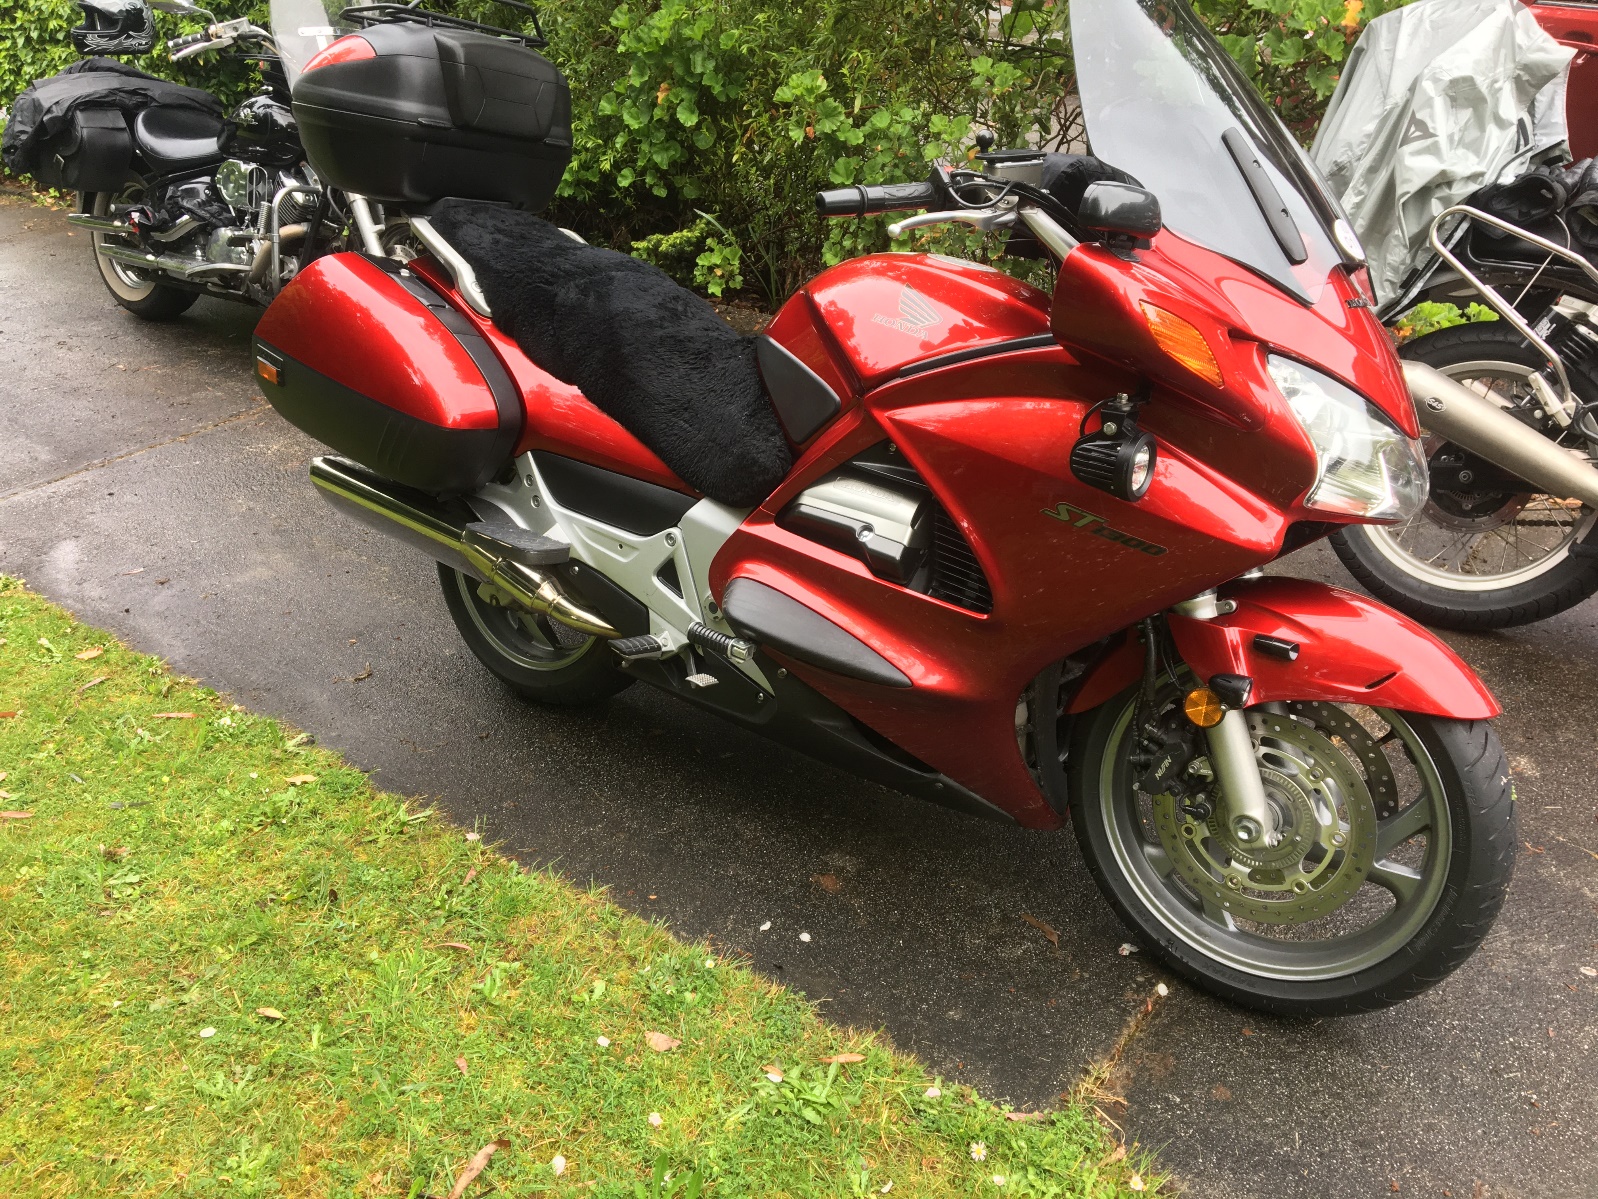 A red motorcycle parked on the side of a road Description automatically generated with medium confidence